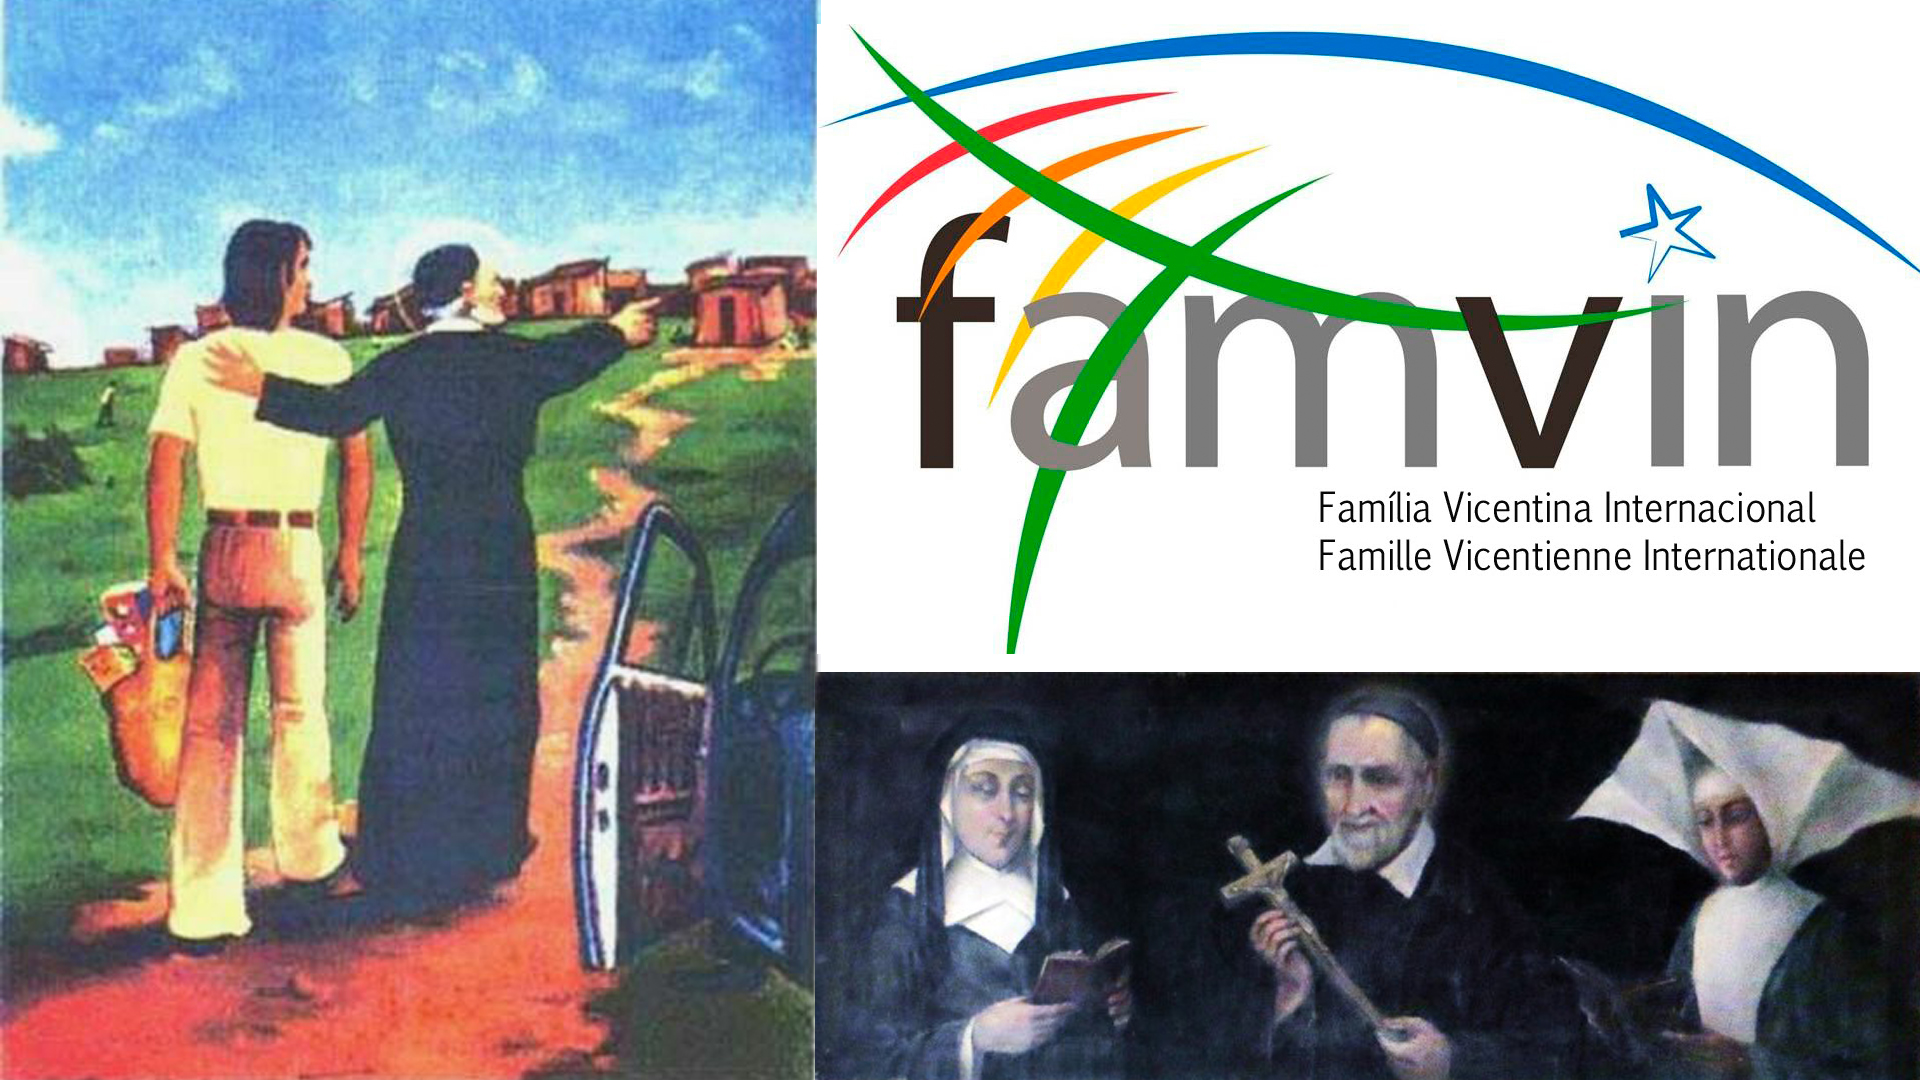 XV National Meeting of the Vincentian Family in Brazil Begins